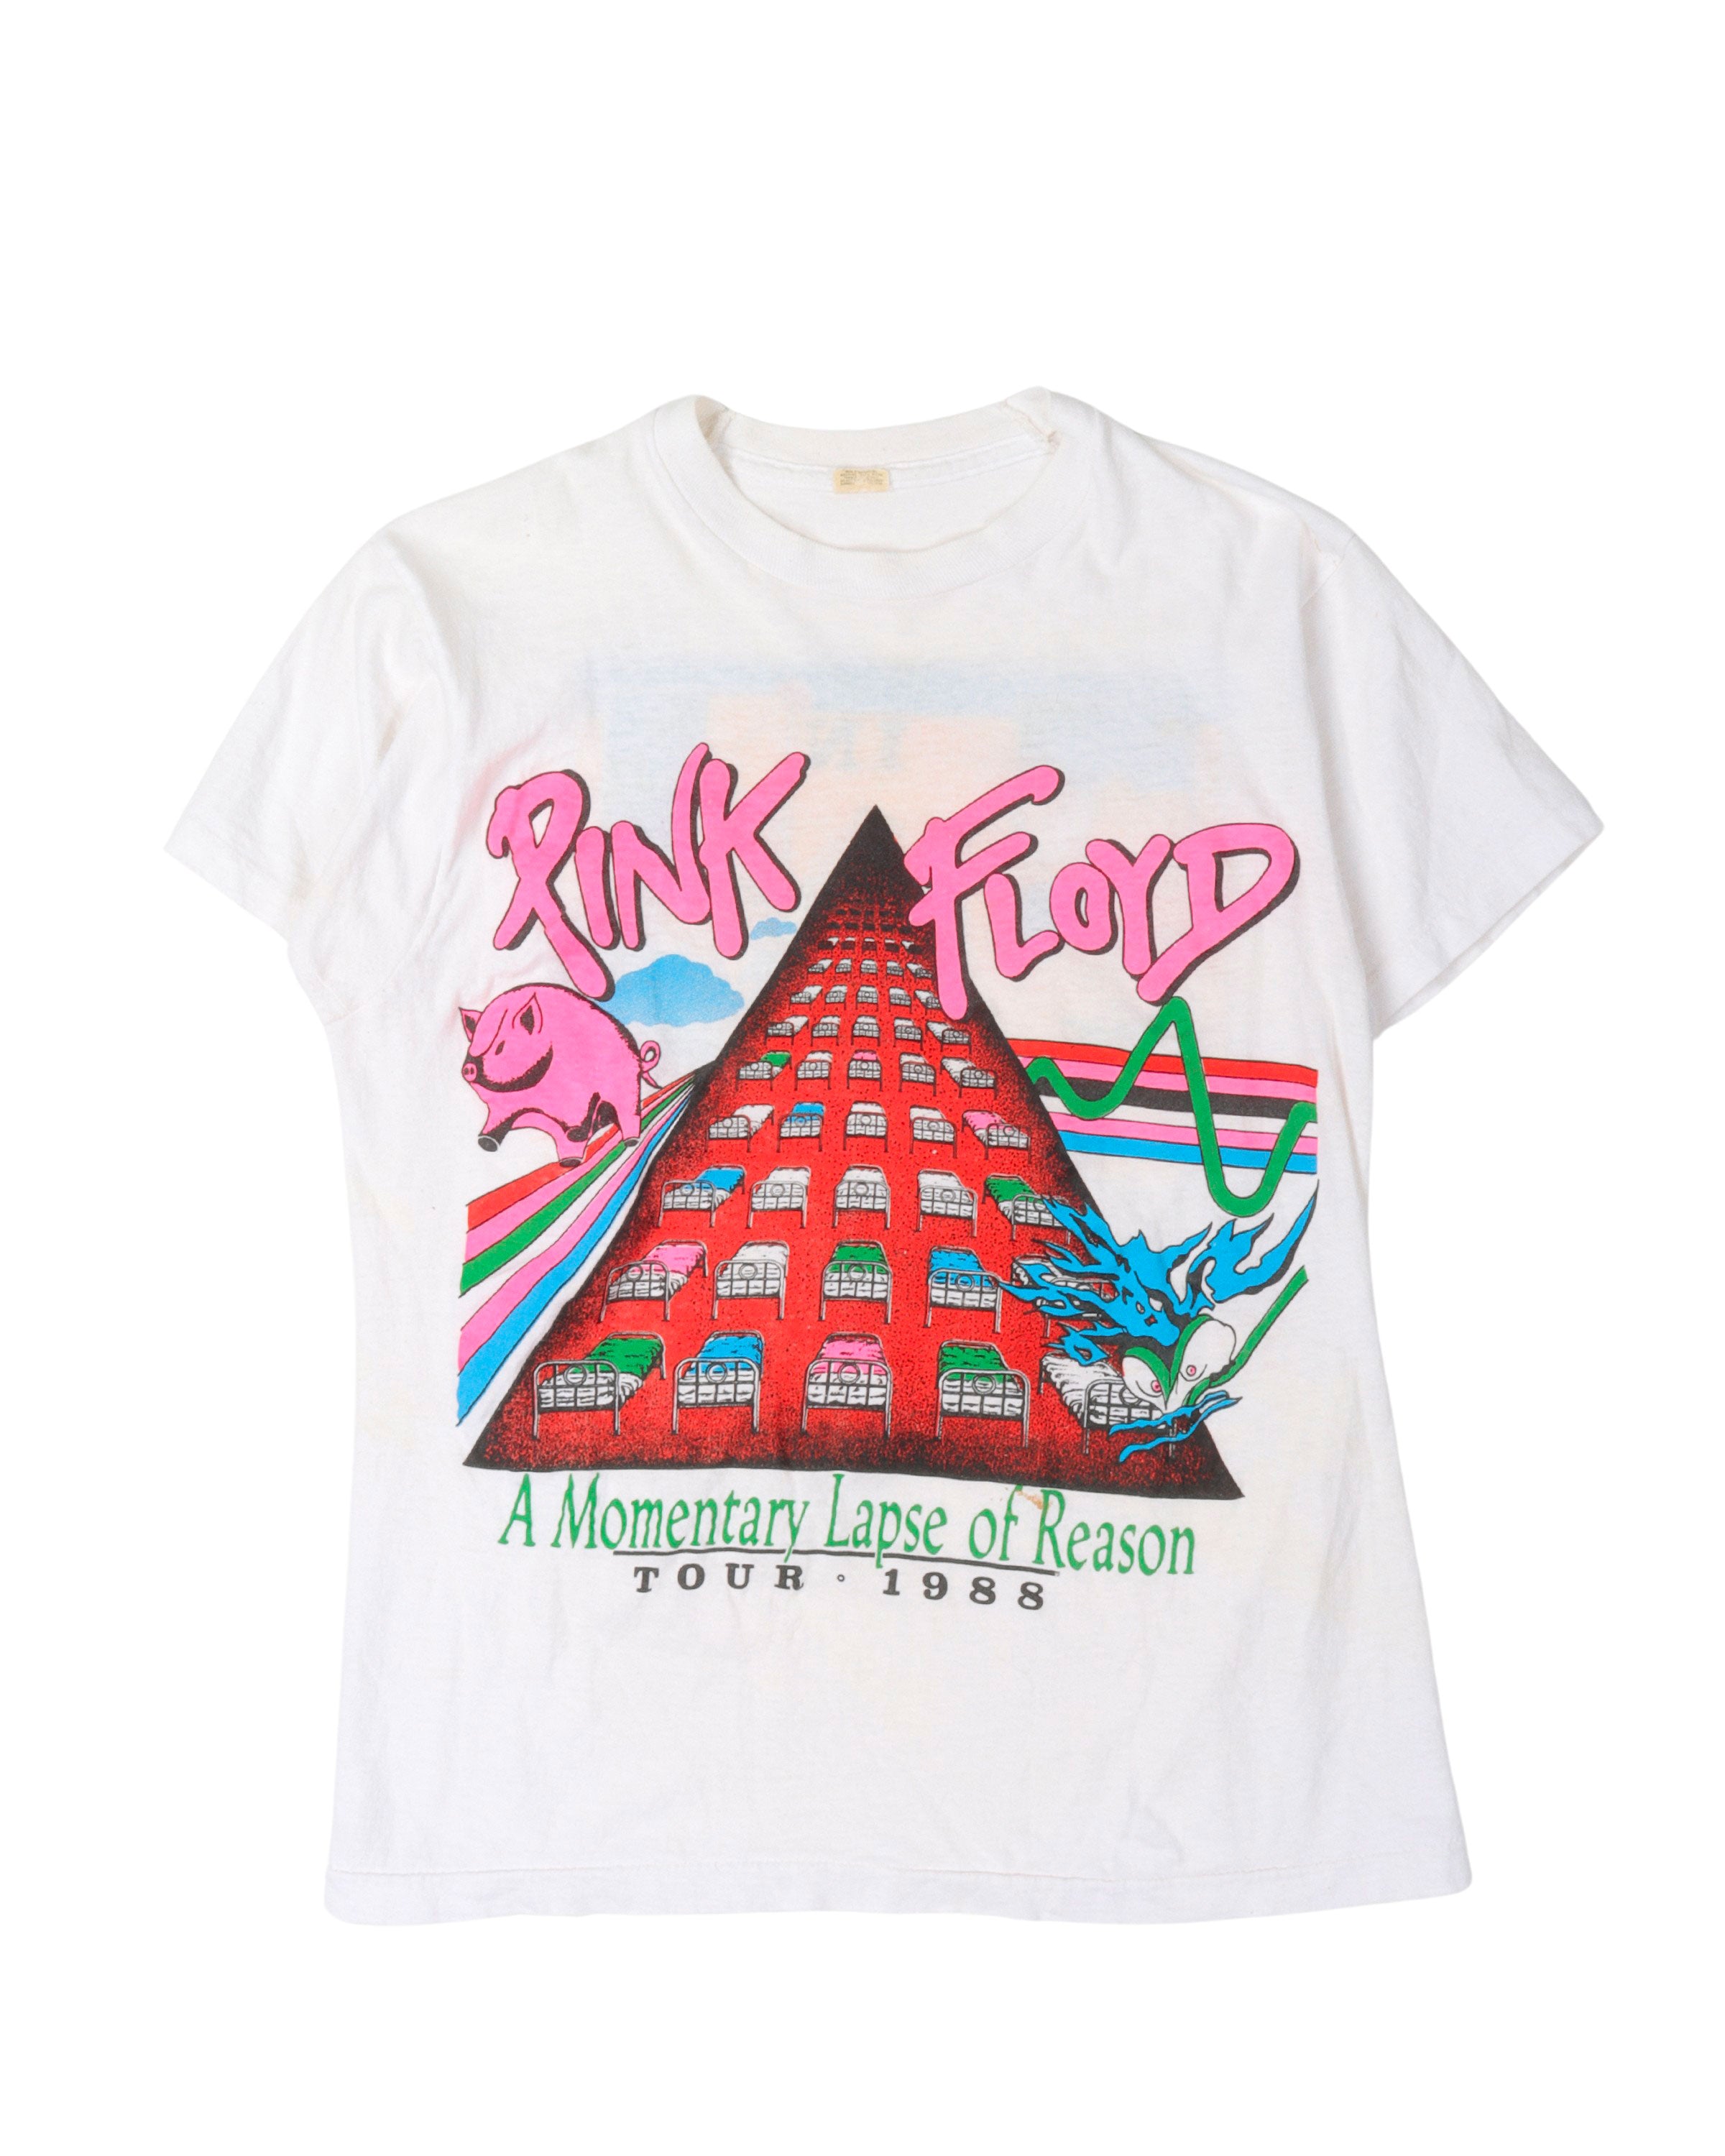 Pink Floyd 1988 Momentary Lapse of Reason Tour T-Shirt